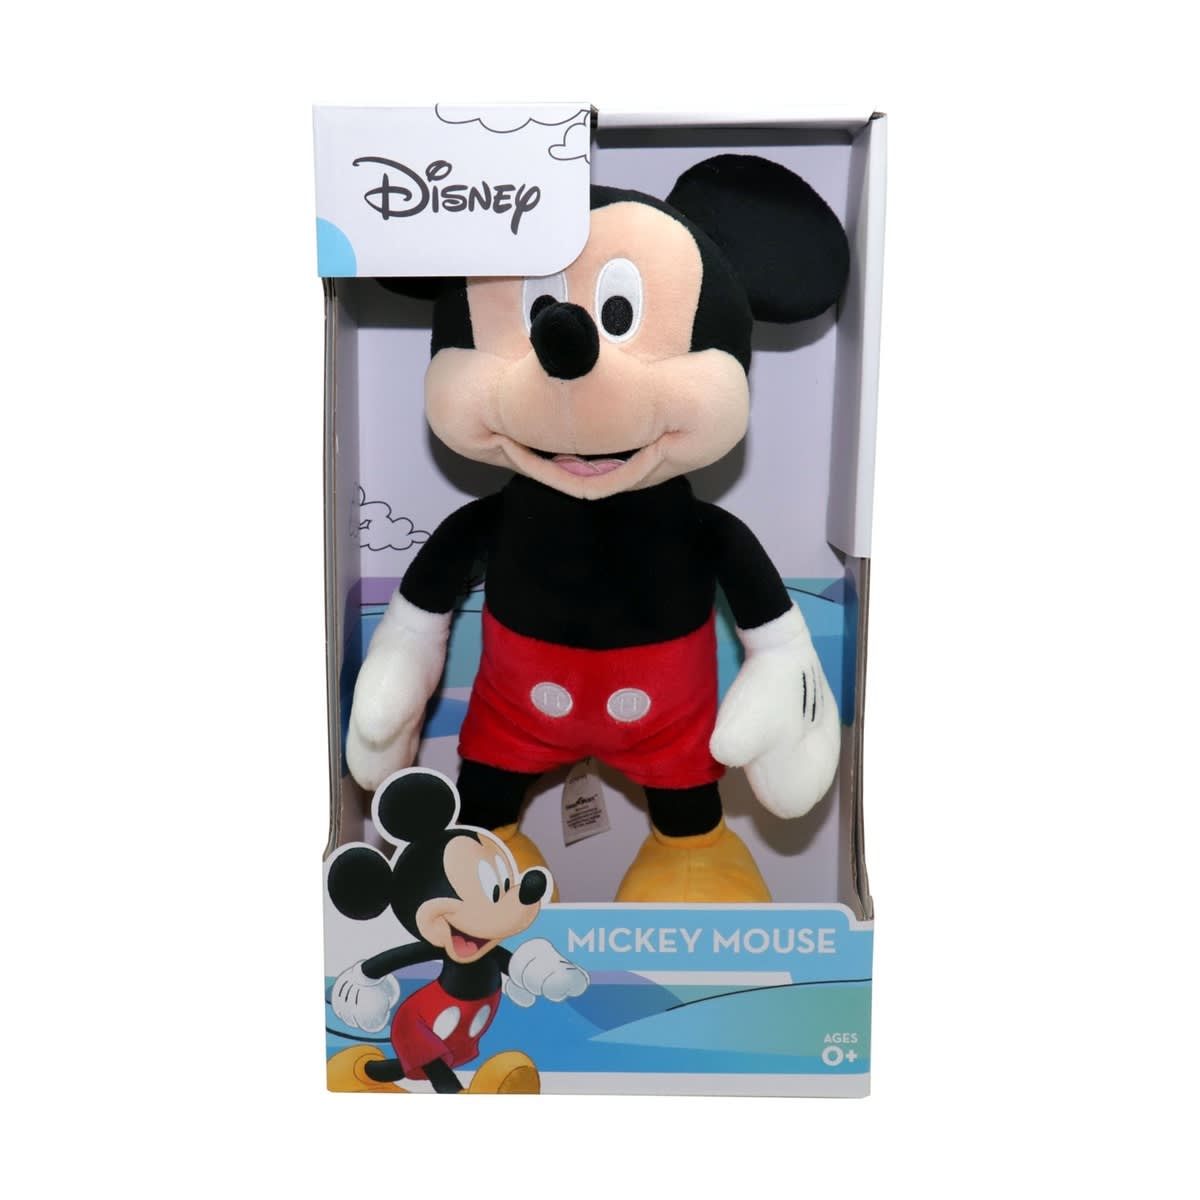 The Best Gift for Halloween and Christmas for Children and Friends Cartoon Mouse Plush Black Mouse Cartoon Plush Toy 